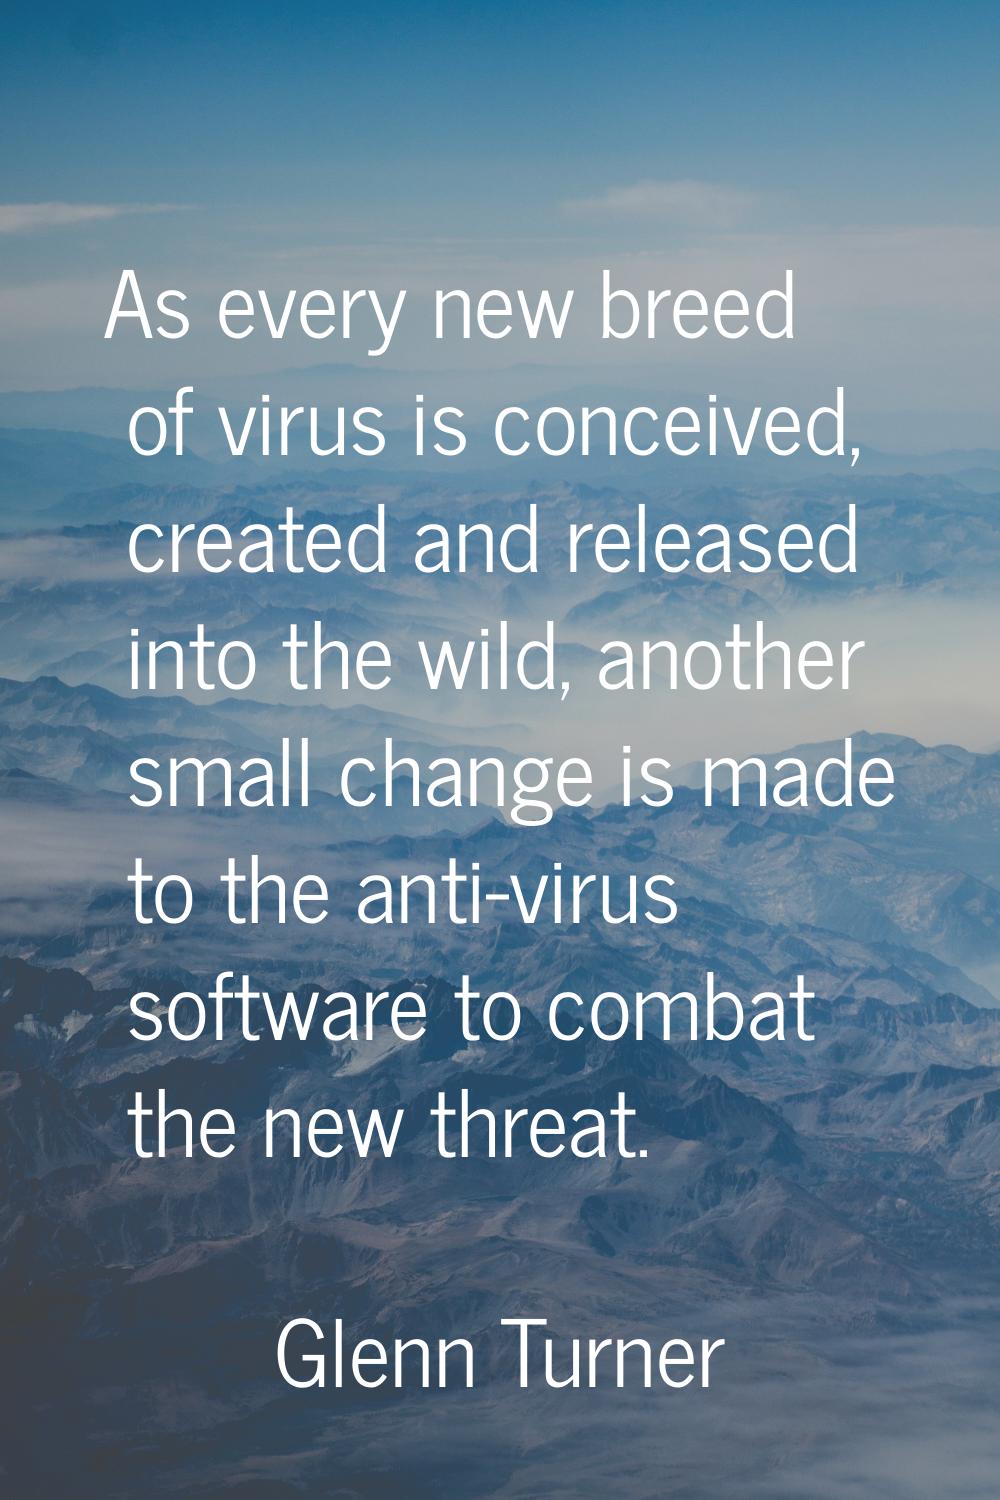 As every new breed of virus is conceived, created and released into the wild, another small change 